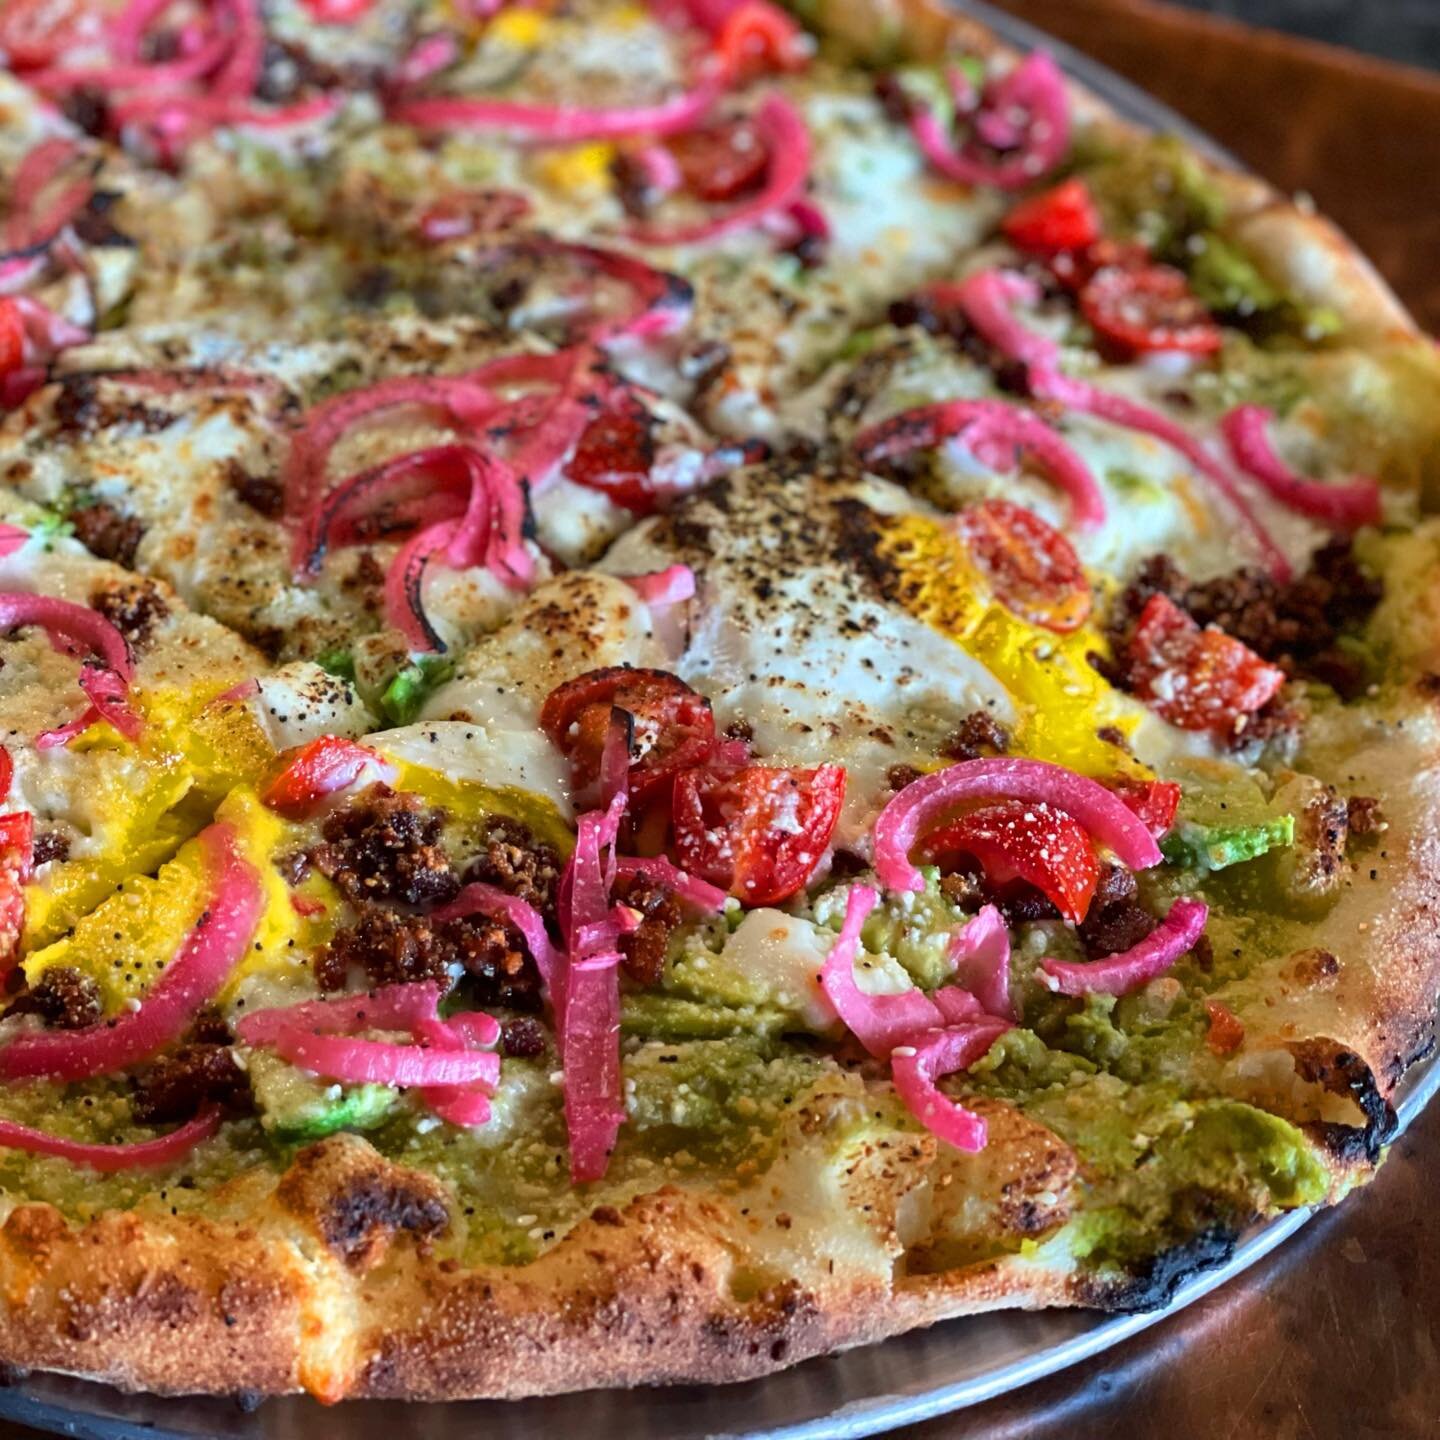 Sundays are for BRUNCH.

Avocado Toast Pie: Avocado puree, bacon, fresh tomatoes, pickled red onions, two eggs, mozzarella &amp; cotija cheese, fresh avocado, &amp; everything bagel seasoning. 

Thinking about brunch in the Portland area? Our friends